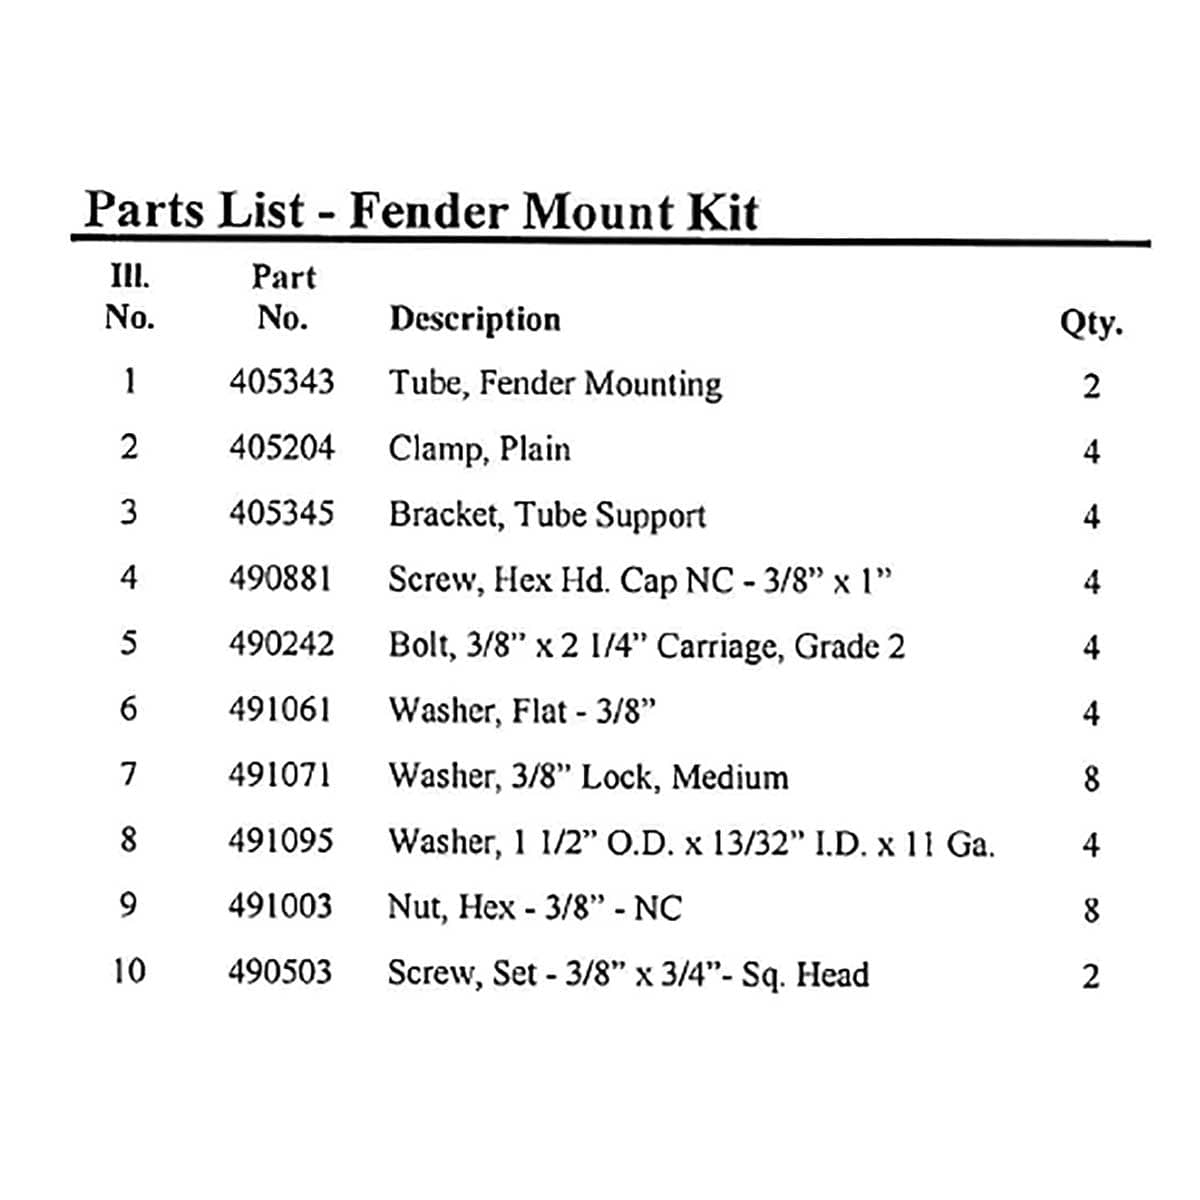 Fender Mount Kit for Folding Buggy-Top Tractor Canopy